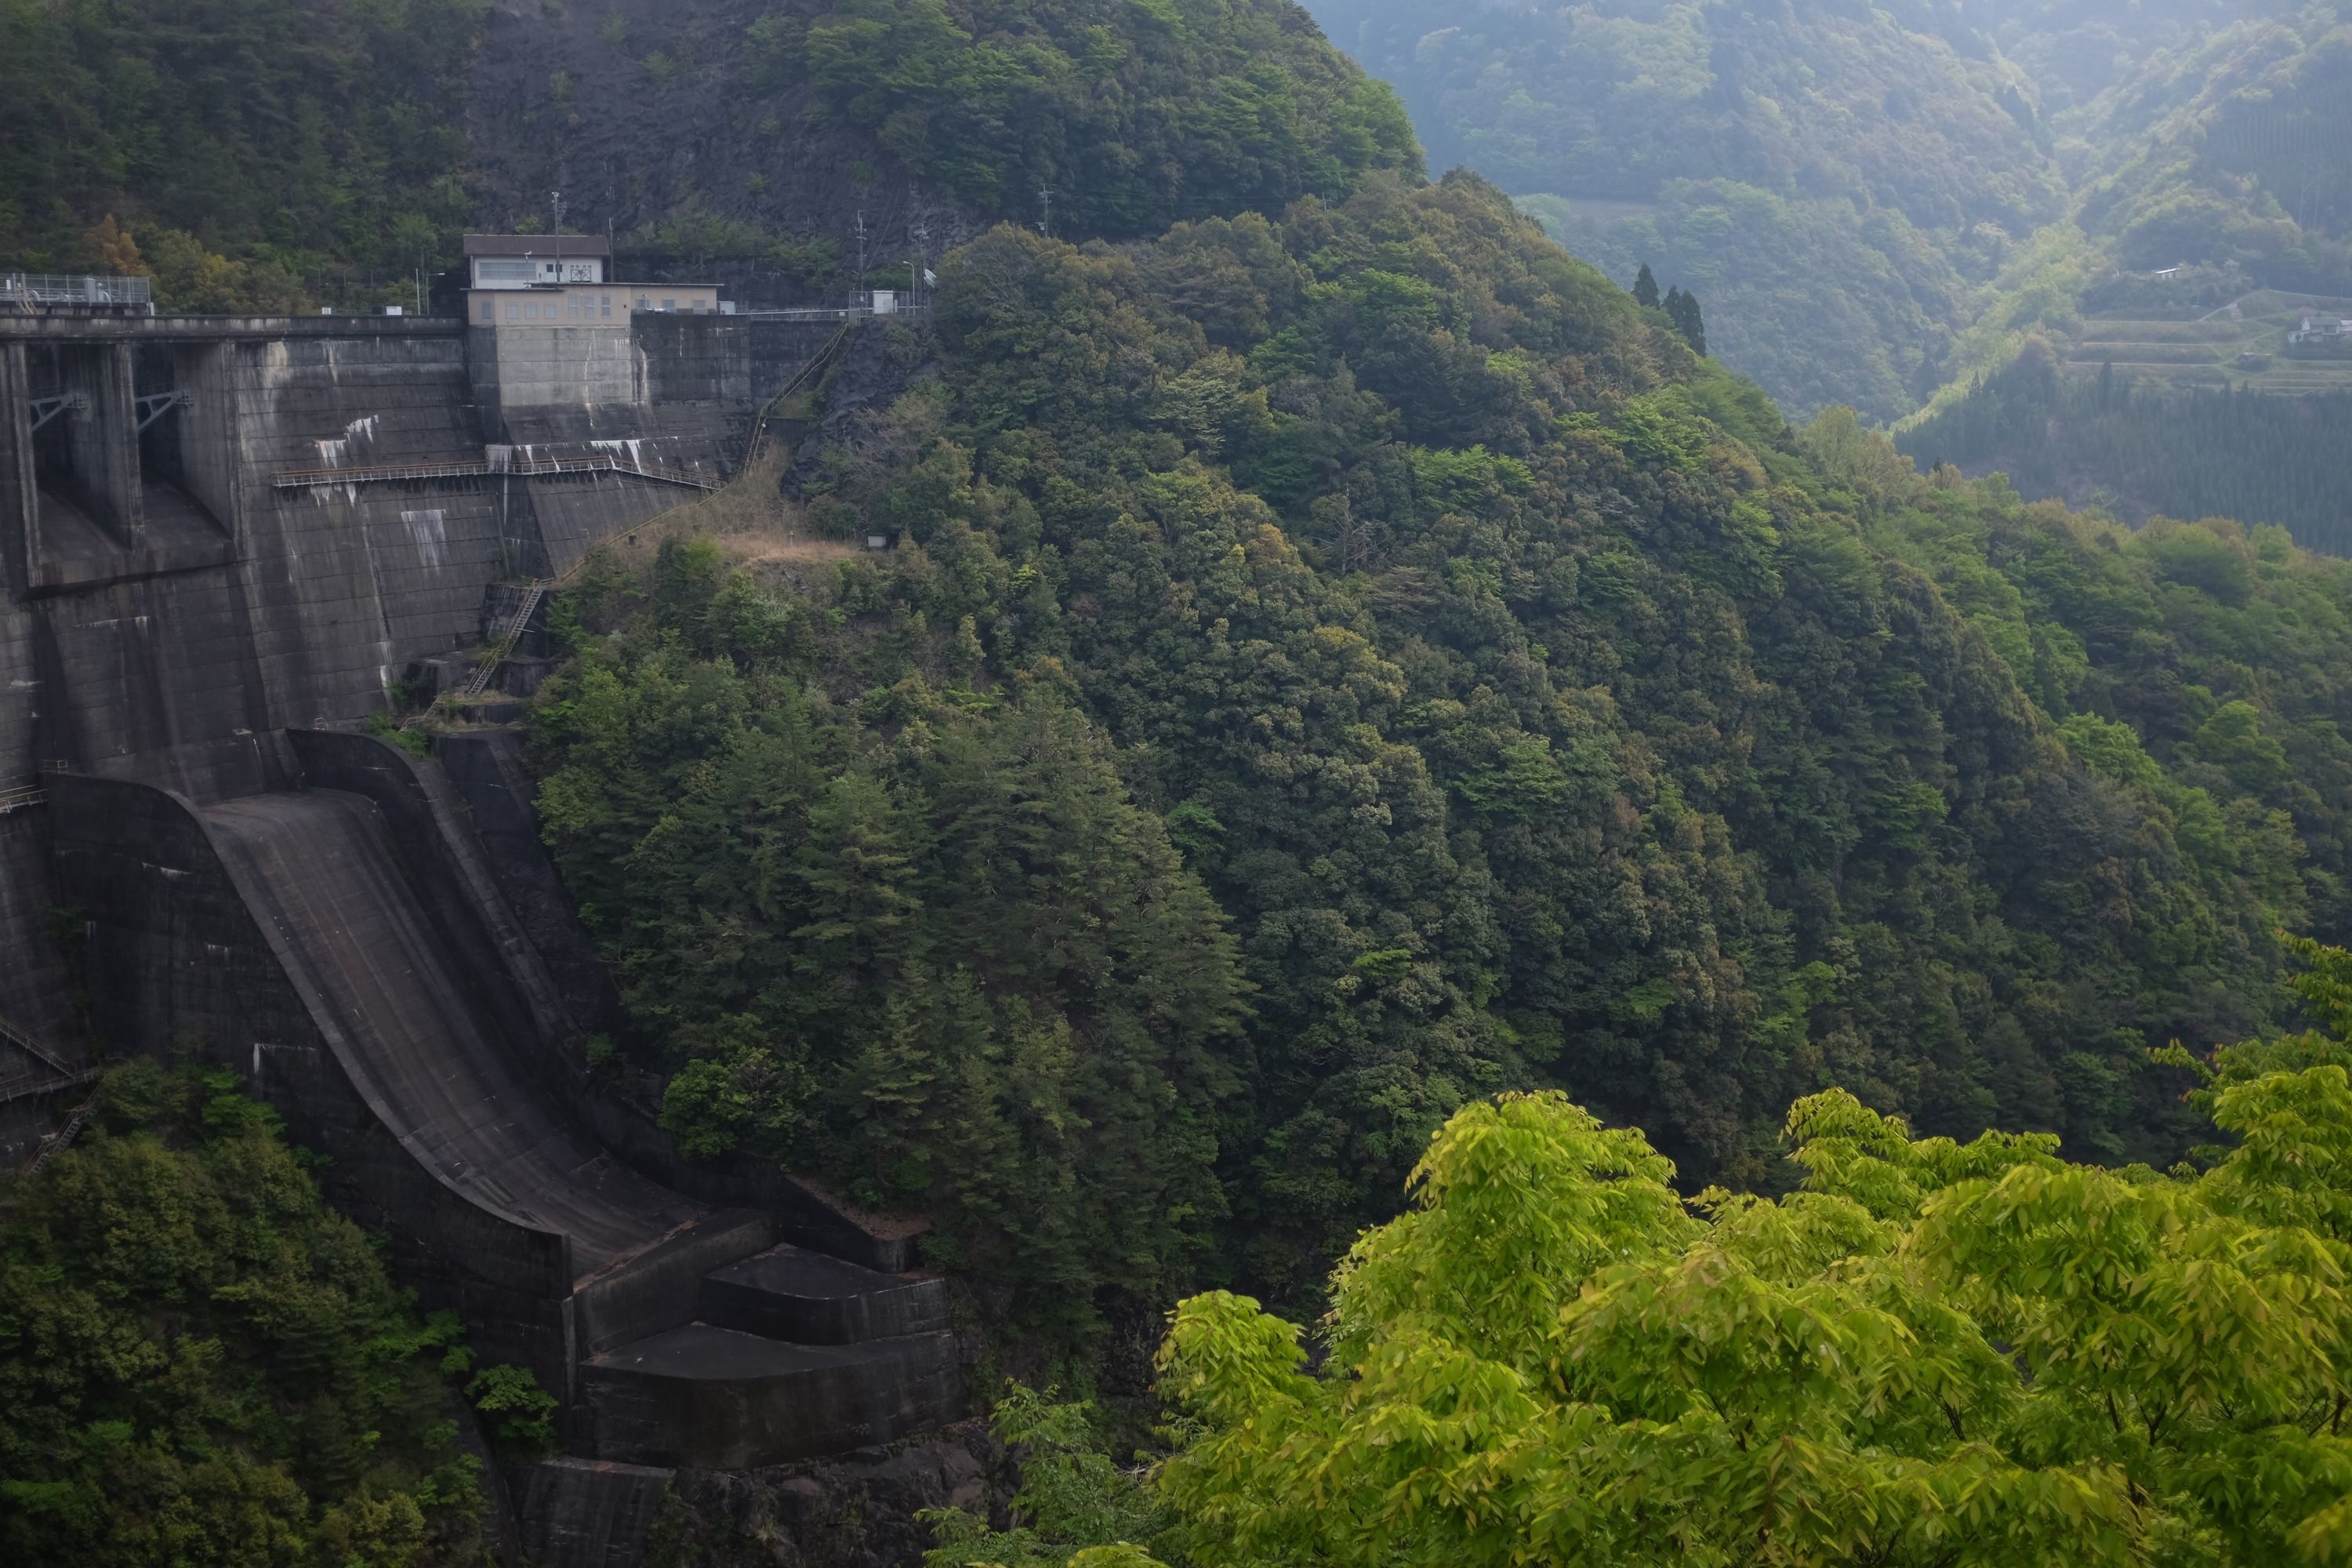 The spillway of an enormous black concrete dam in a thickly forested, very steep valley.